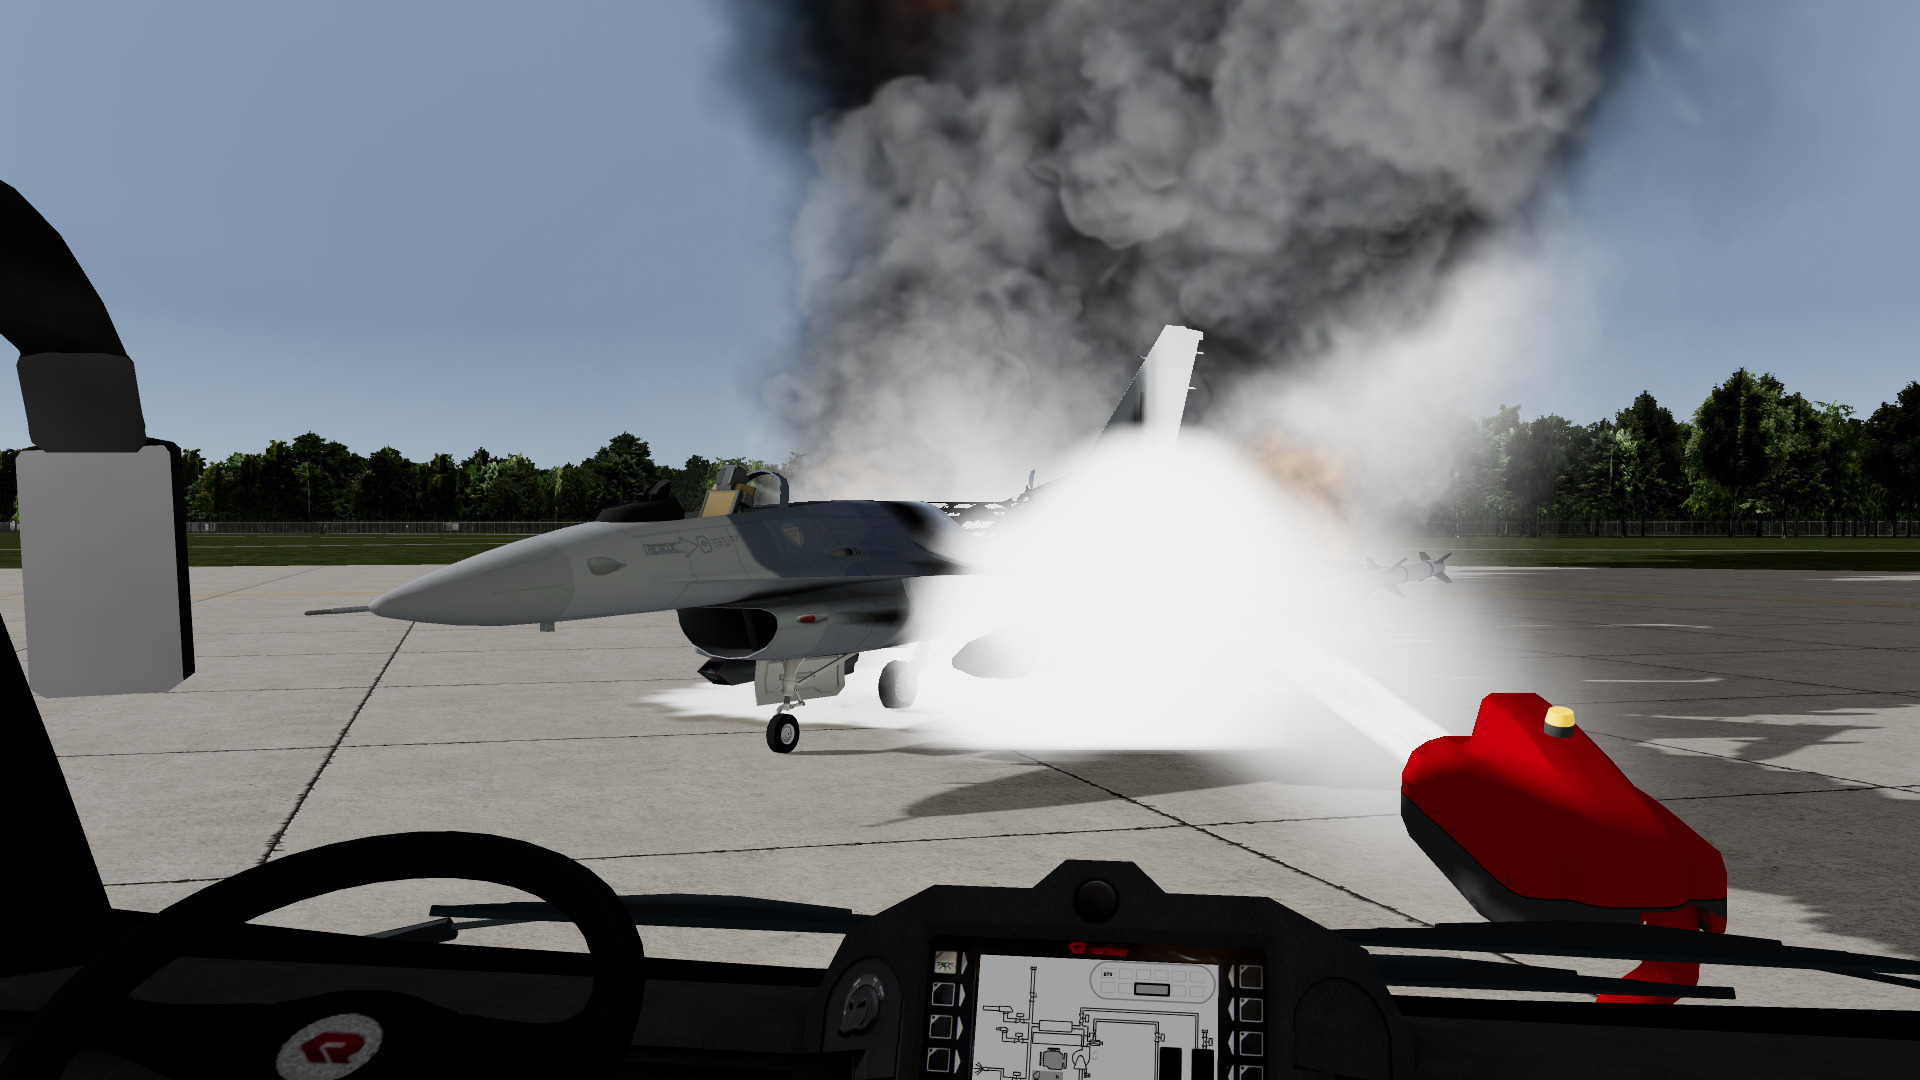 Simulated ARFF Bumper Cannon attack using Foam to extinguish a large F-16 Fire.